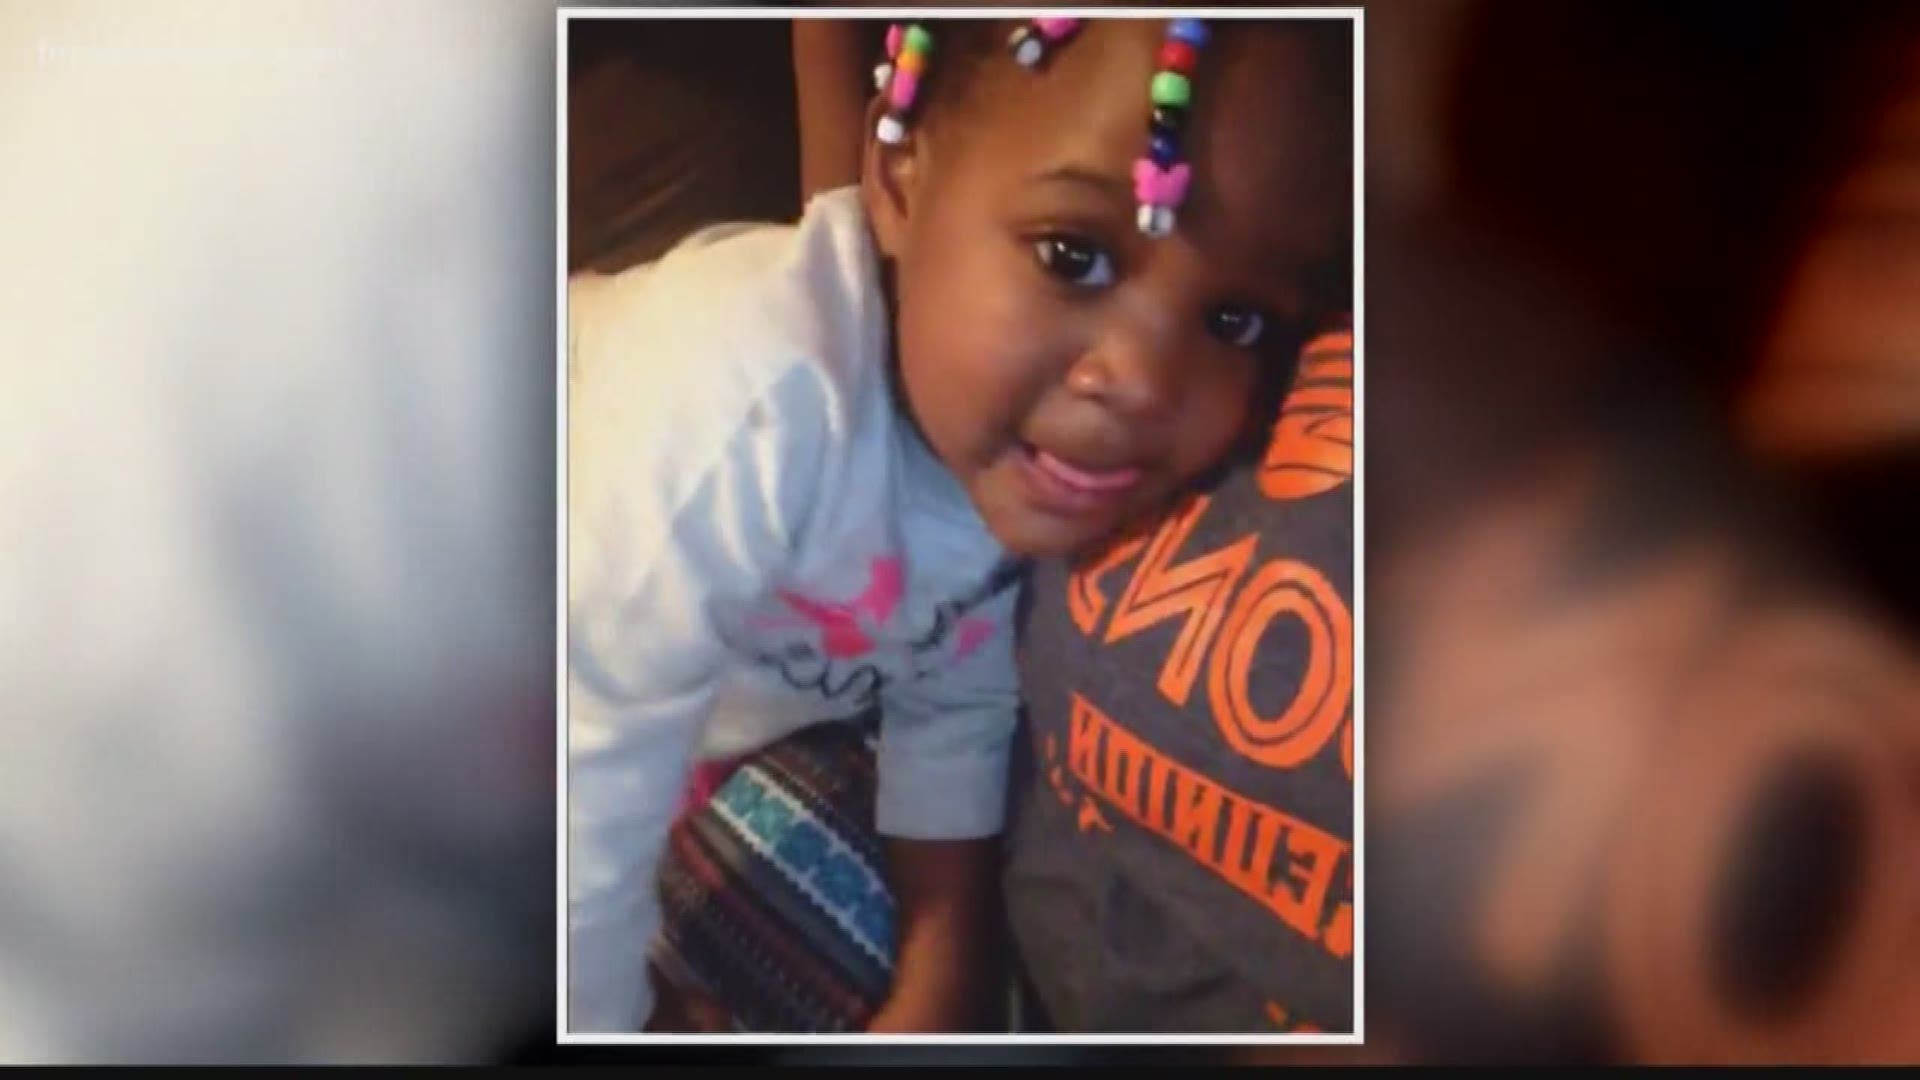 A vigil is planned for 5-year-old Taylor Williams, whose remains were found in Alabama about a week after she was reported missing from her home in Jacksonville.